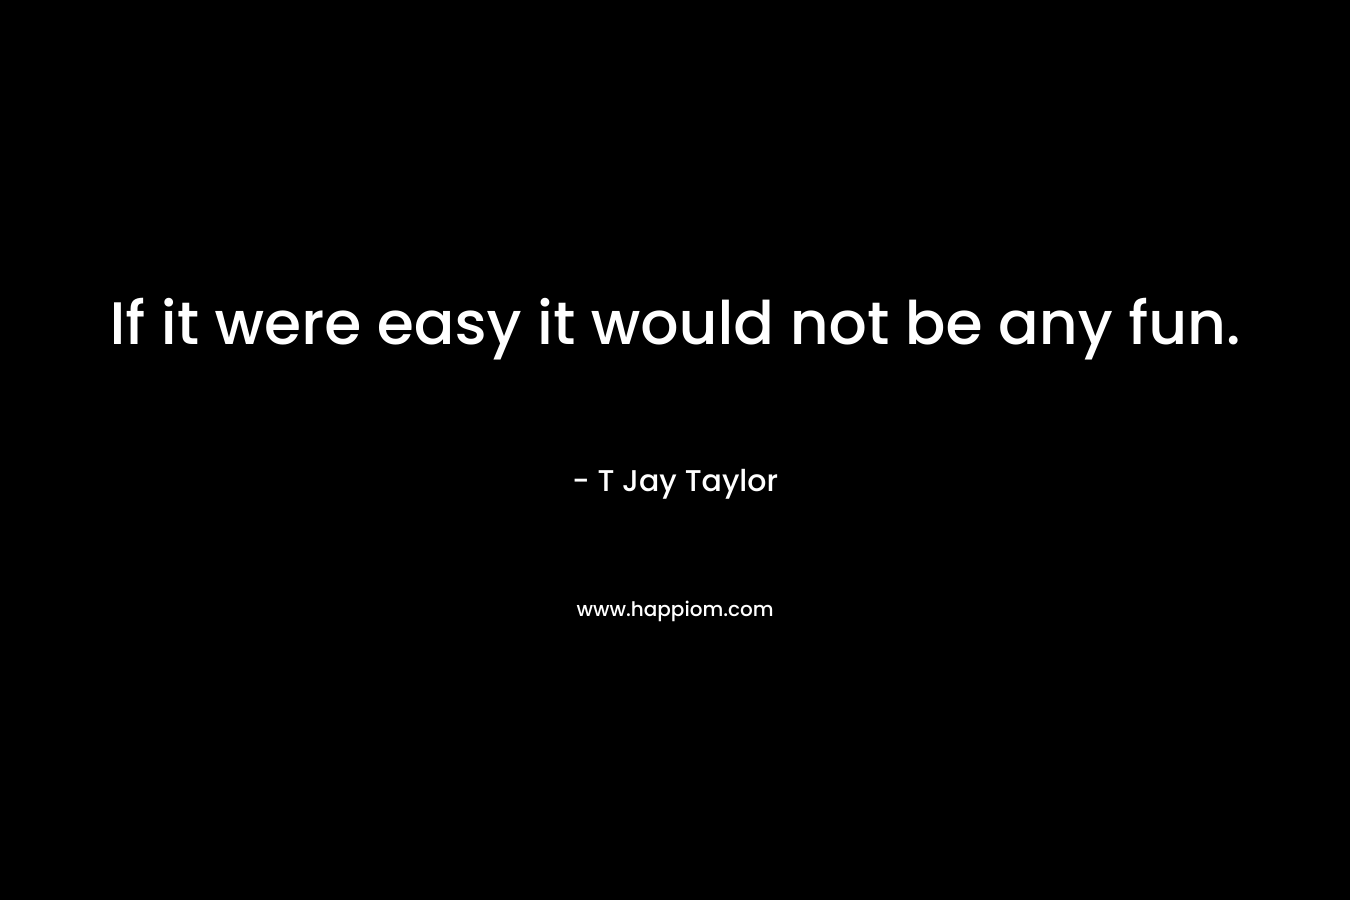 If it were easy it would not be any fun. – T Jay Taylor